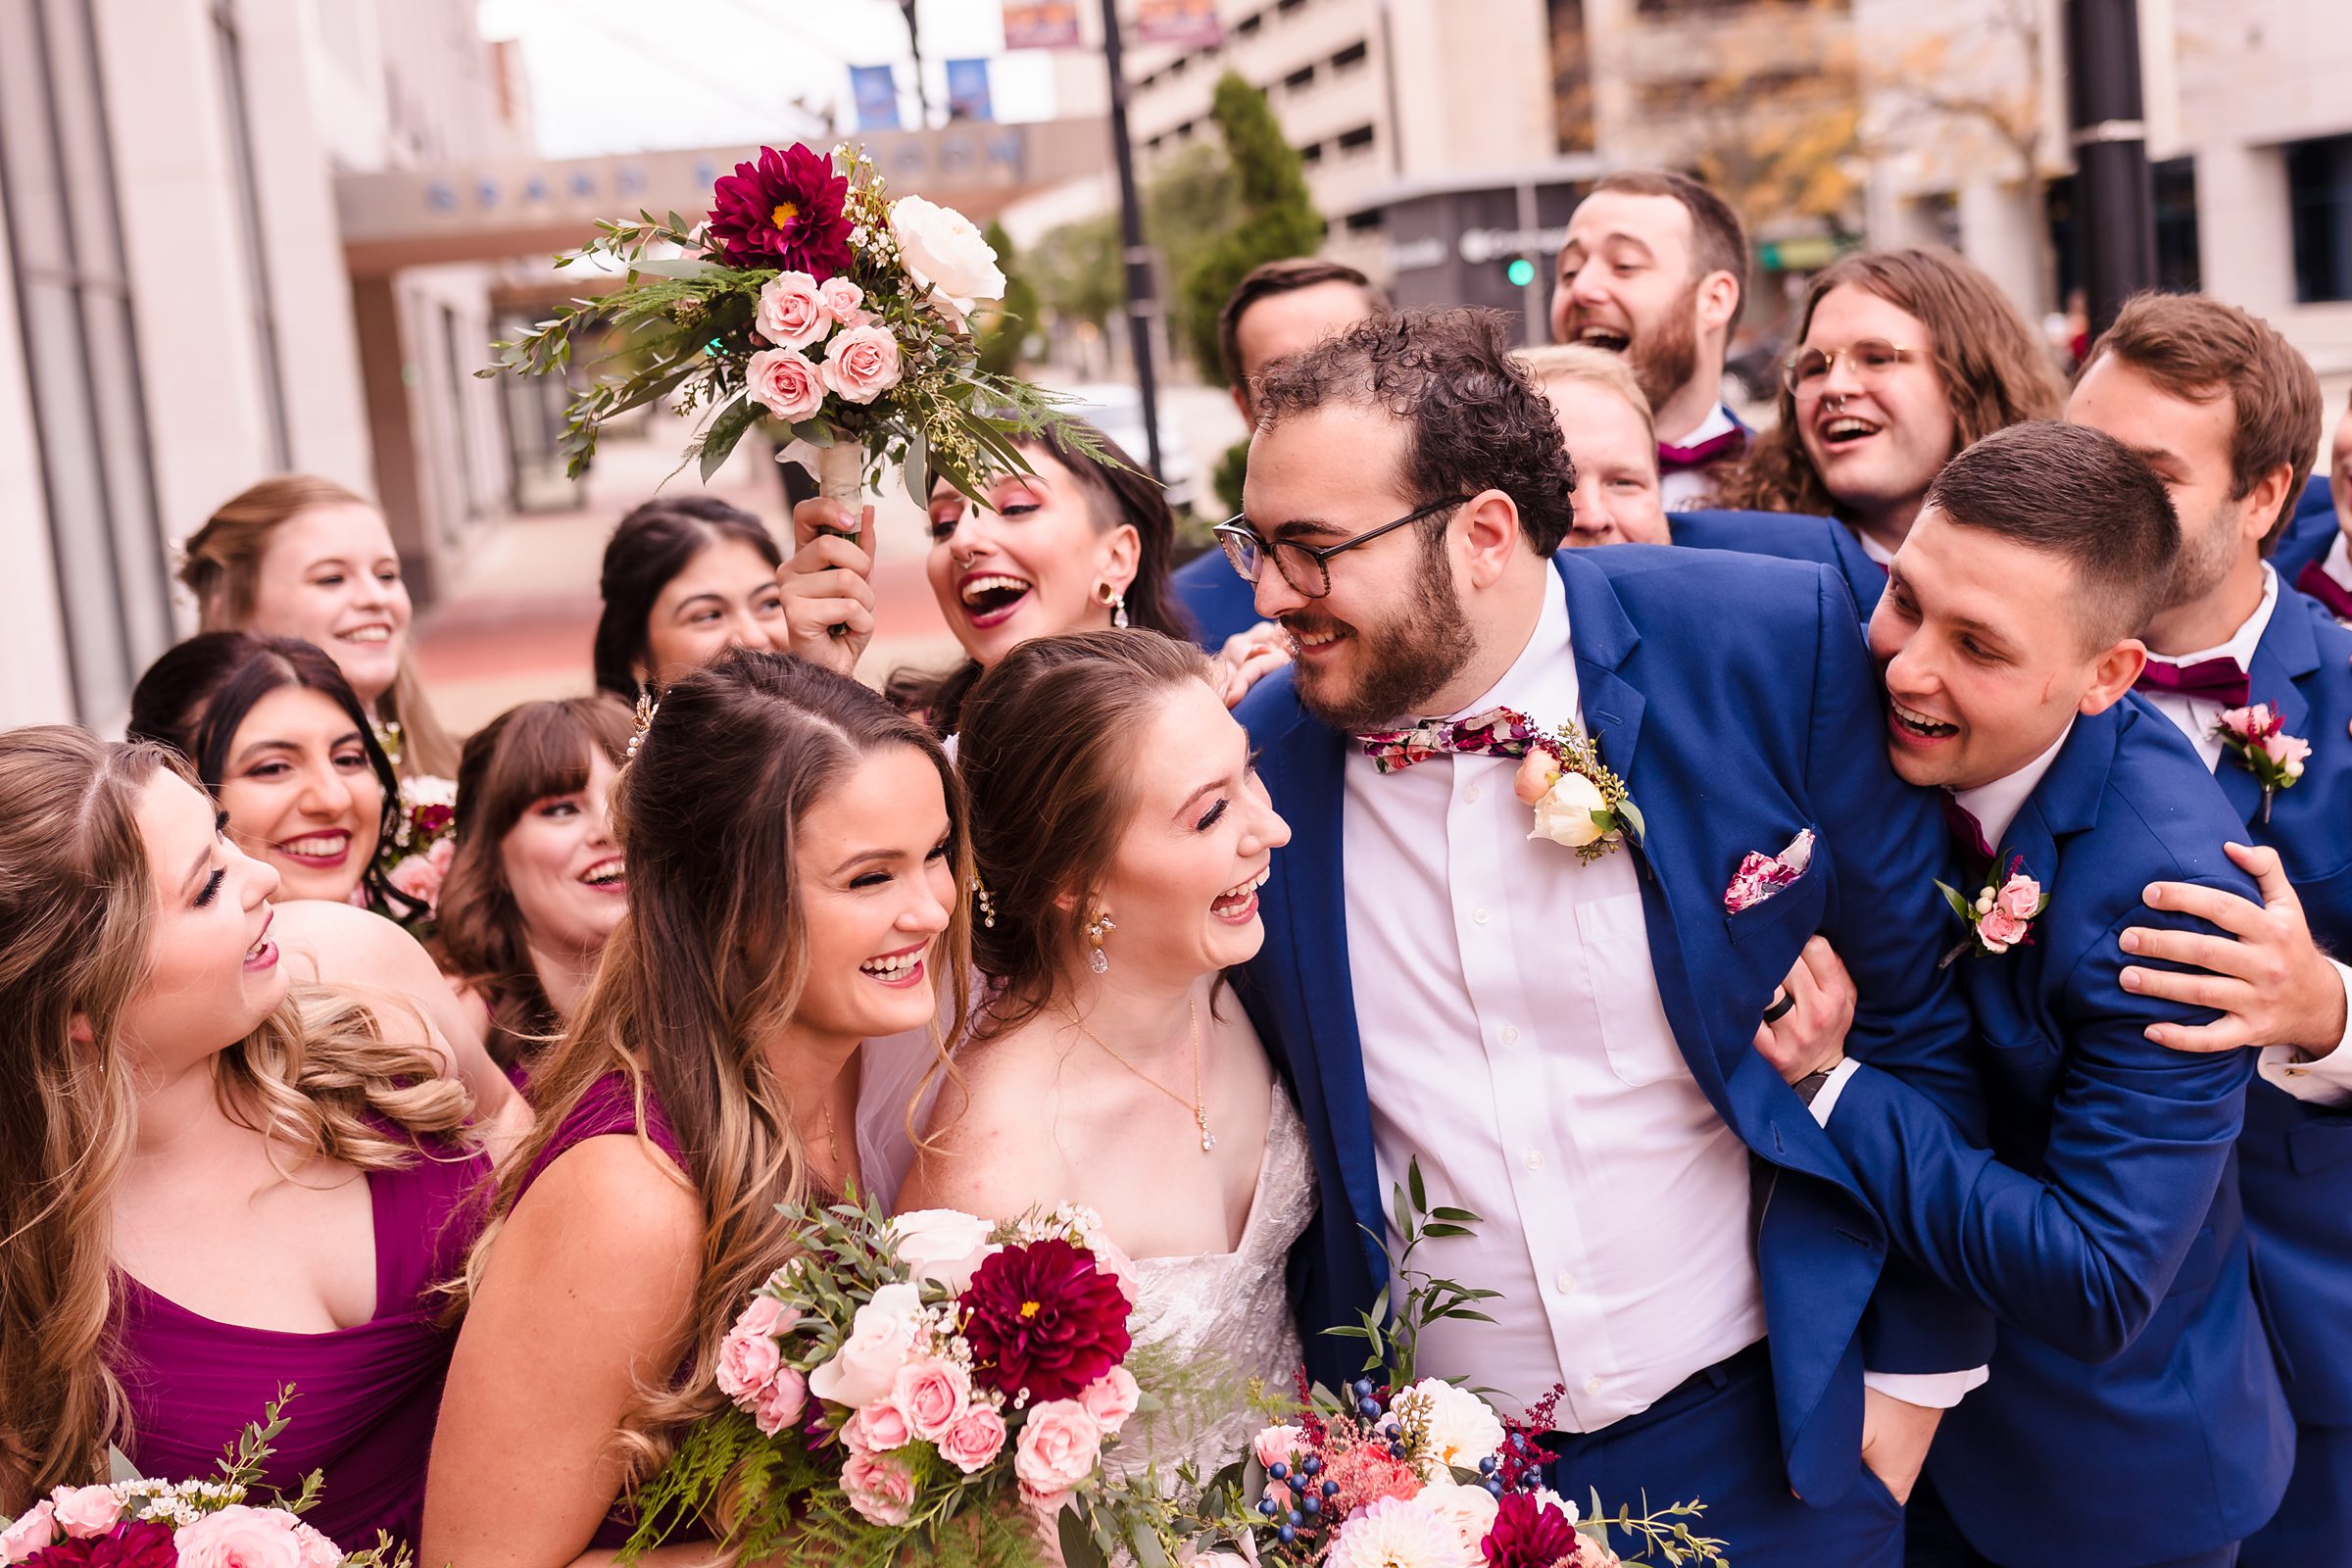 Bridal party celebrate with the couple before a wedding at the Hotel Pere Marquette in Peoria, Illinois.